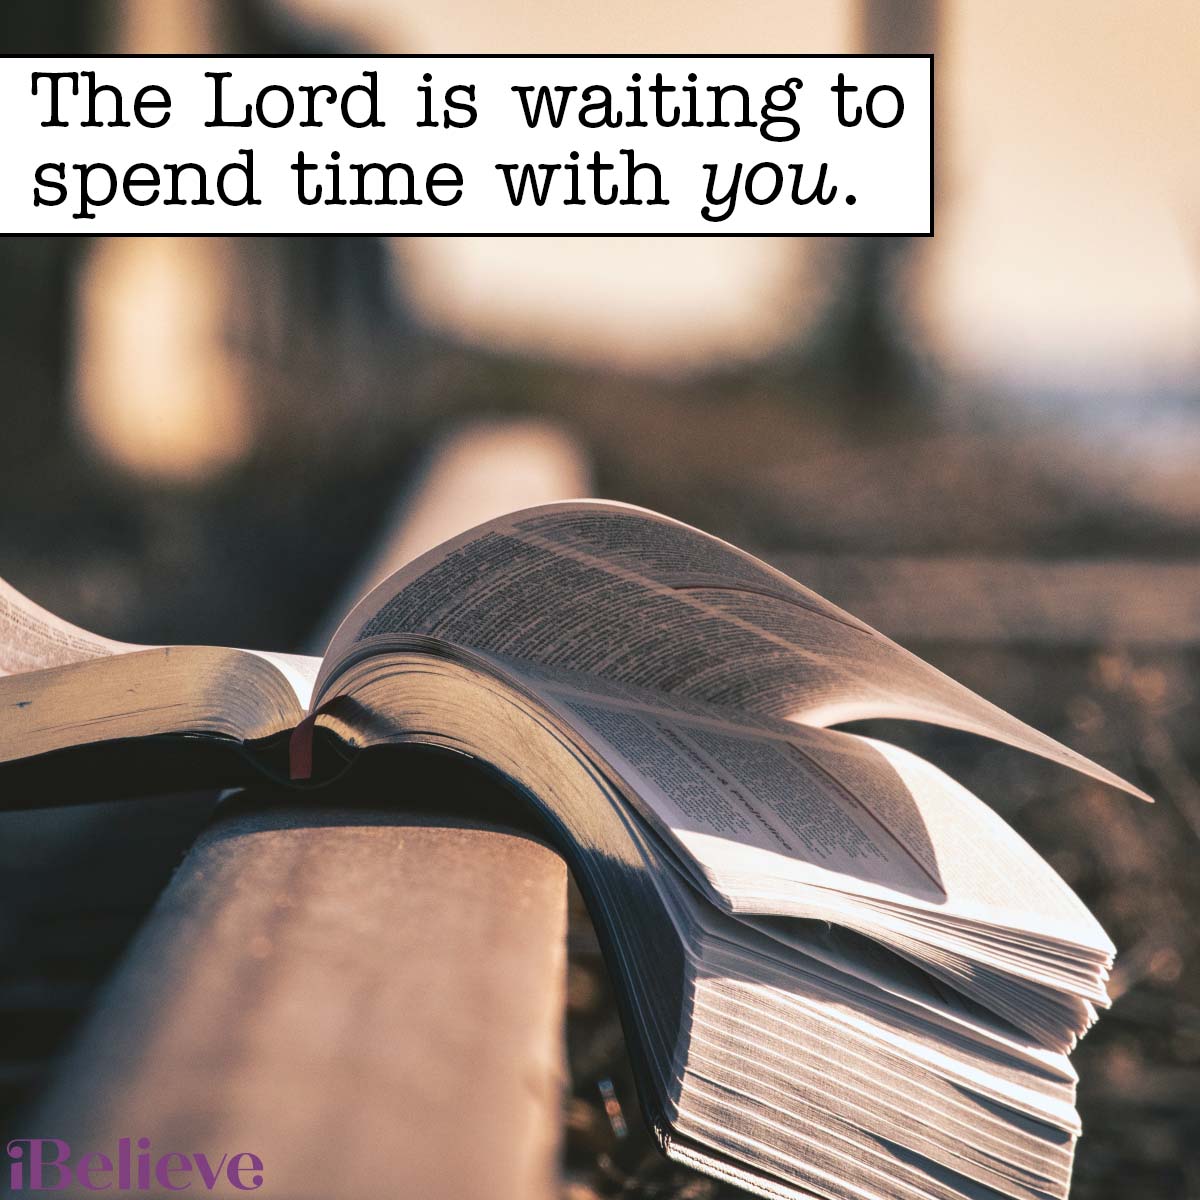 the Lord is waiting to spend time with you, inspirational photo